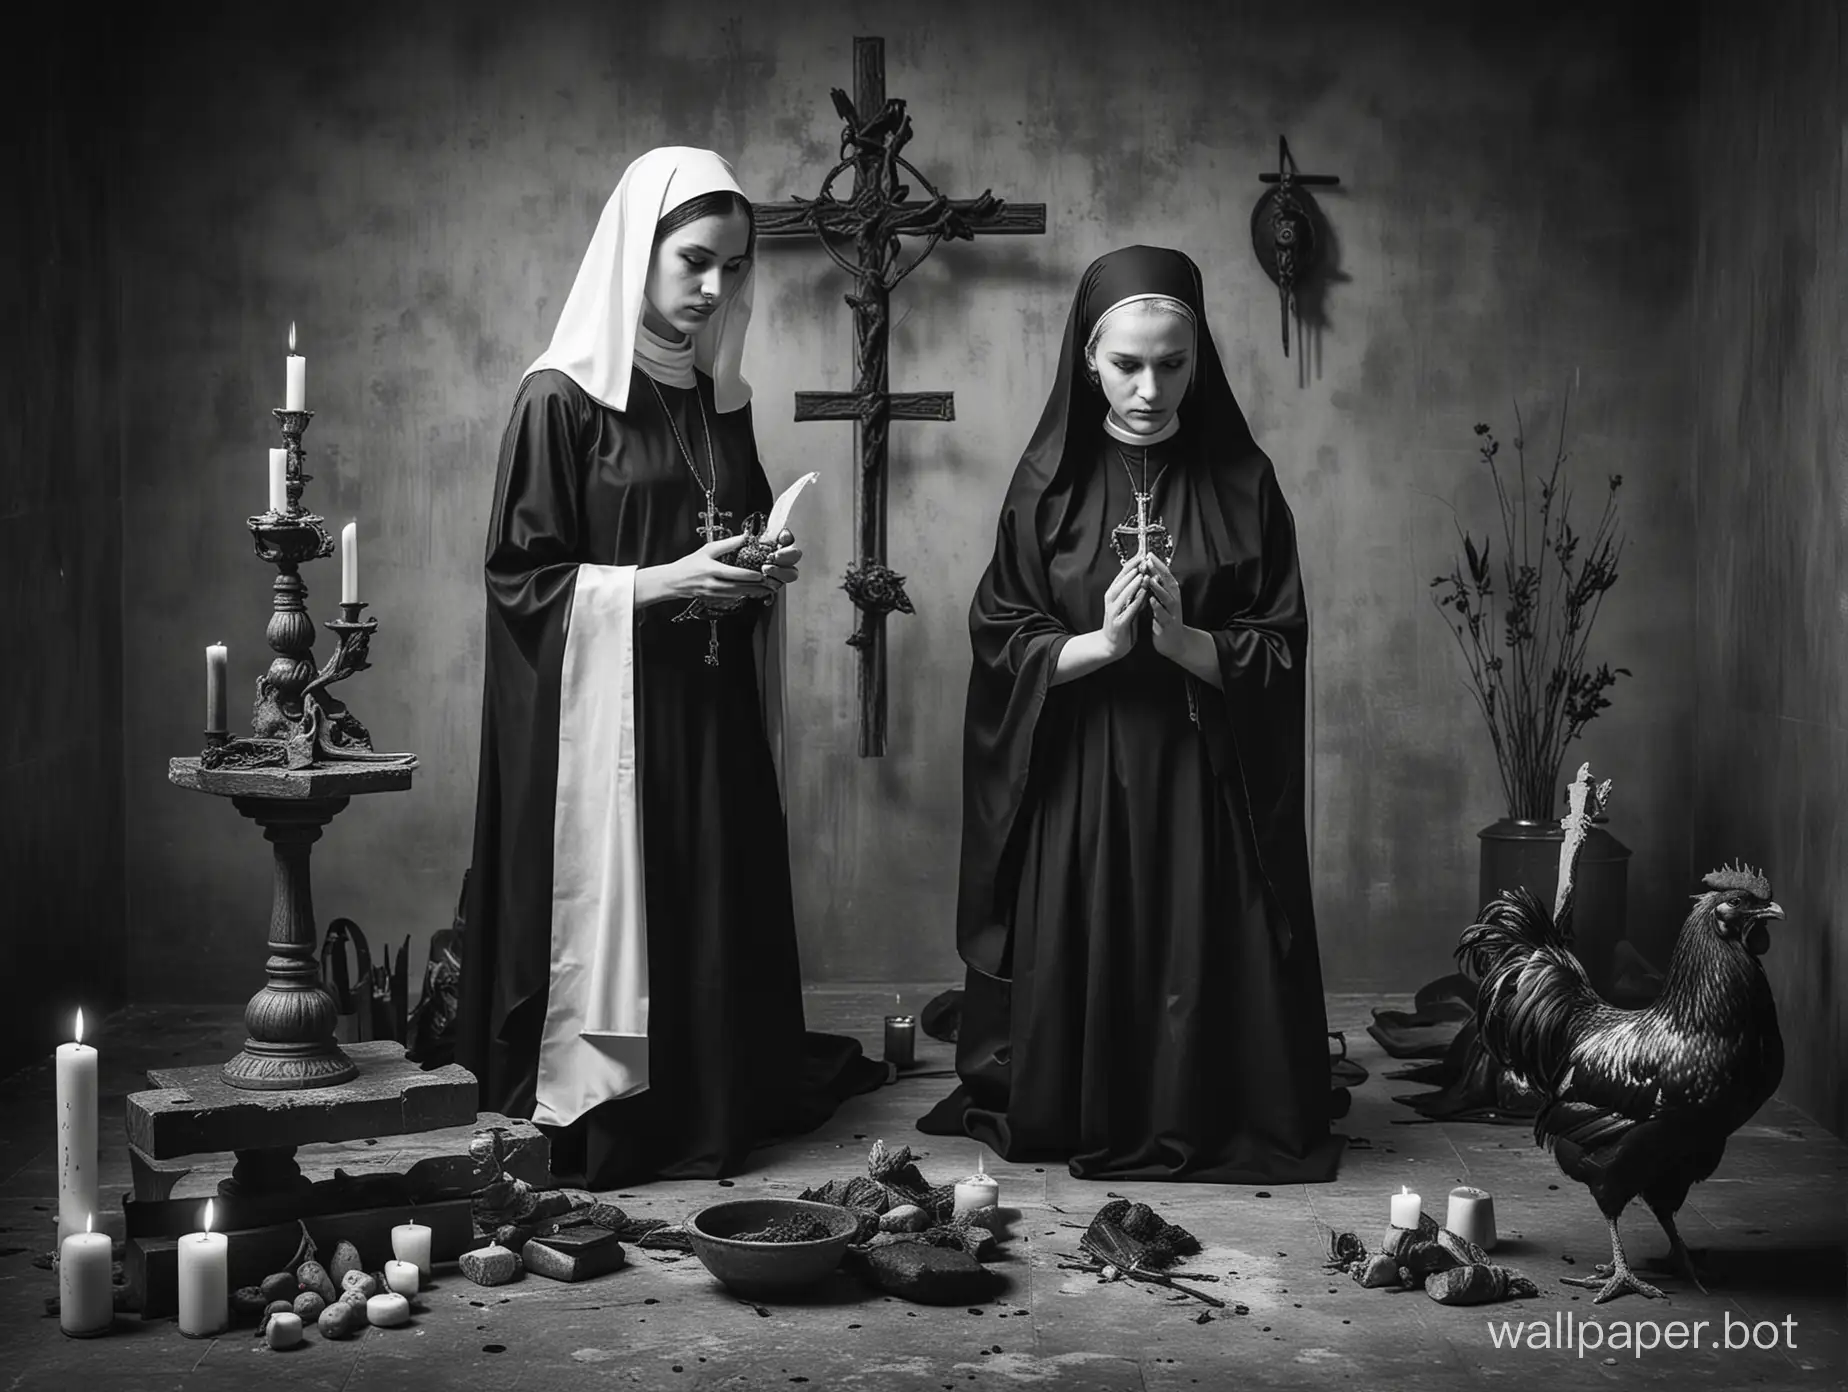 Satanic-Ritual-Girl-Sacrificing-Rooster-on-Altar-High-Contrast-Black-and-White-Photography